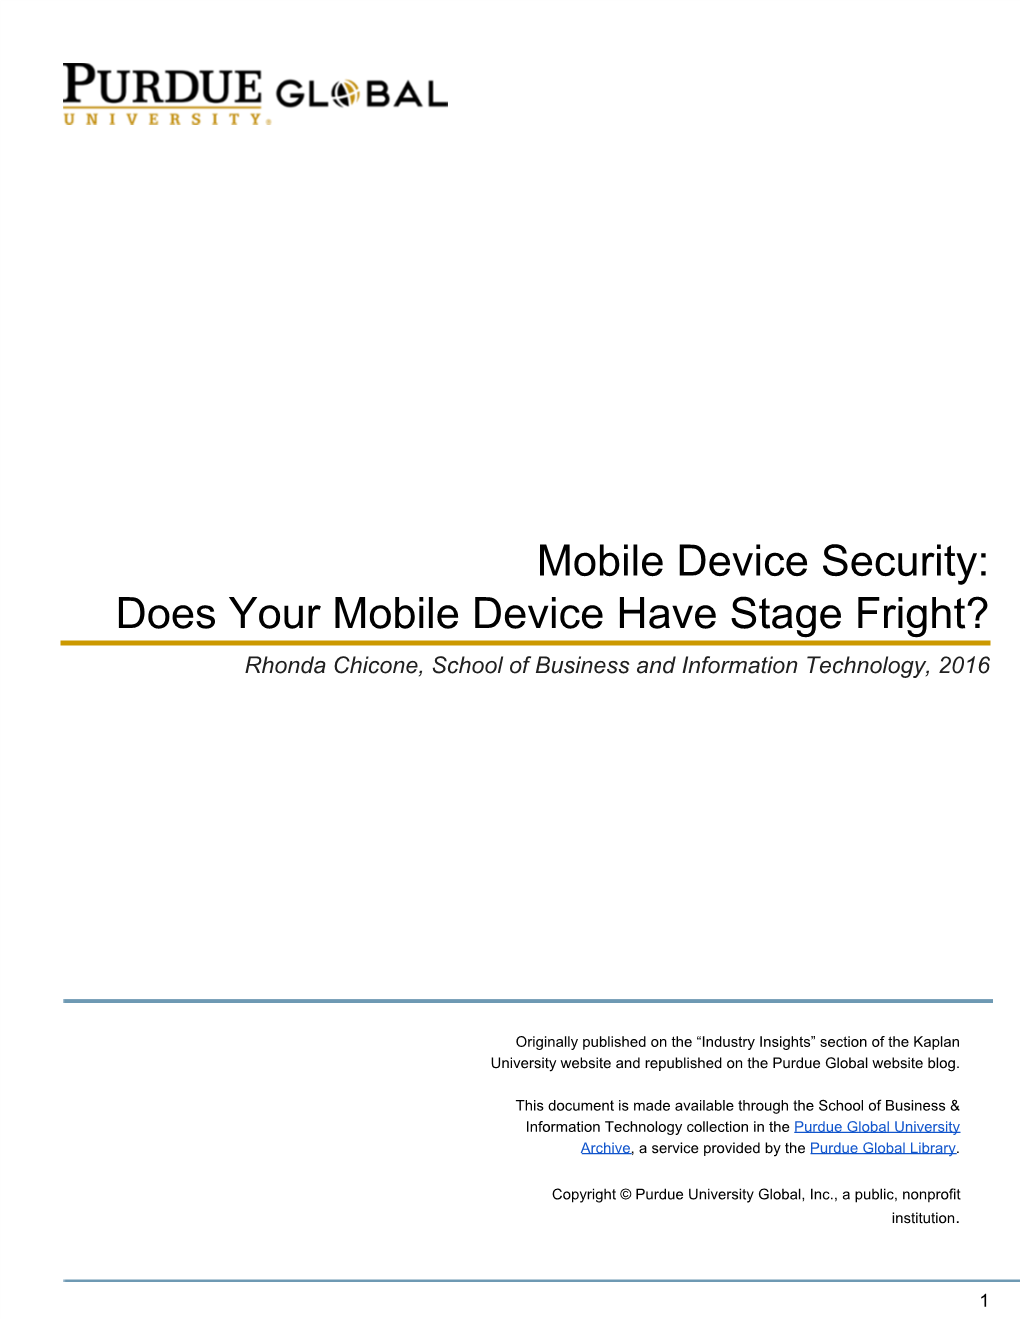 Mobile Device Security: Does Your Mobile Device Have Stage Fright? Rhonda Chicone, School of Business and Information Technology, 2016